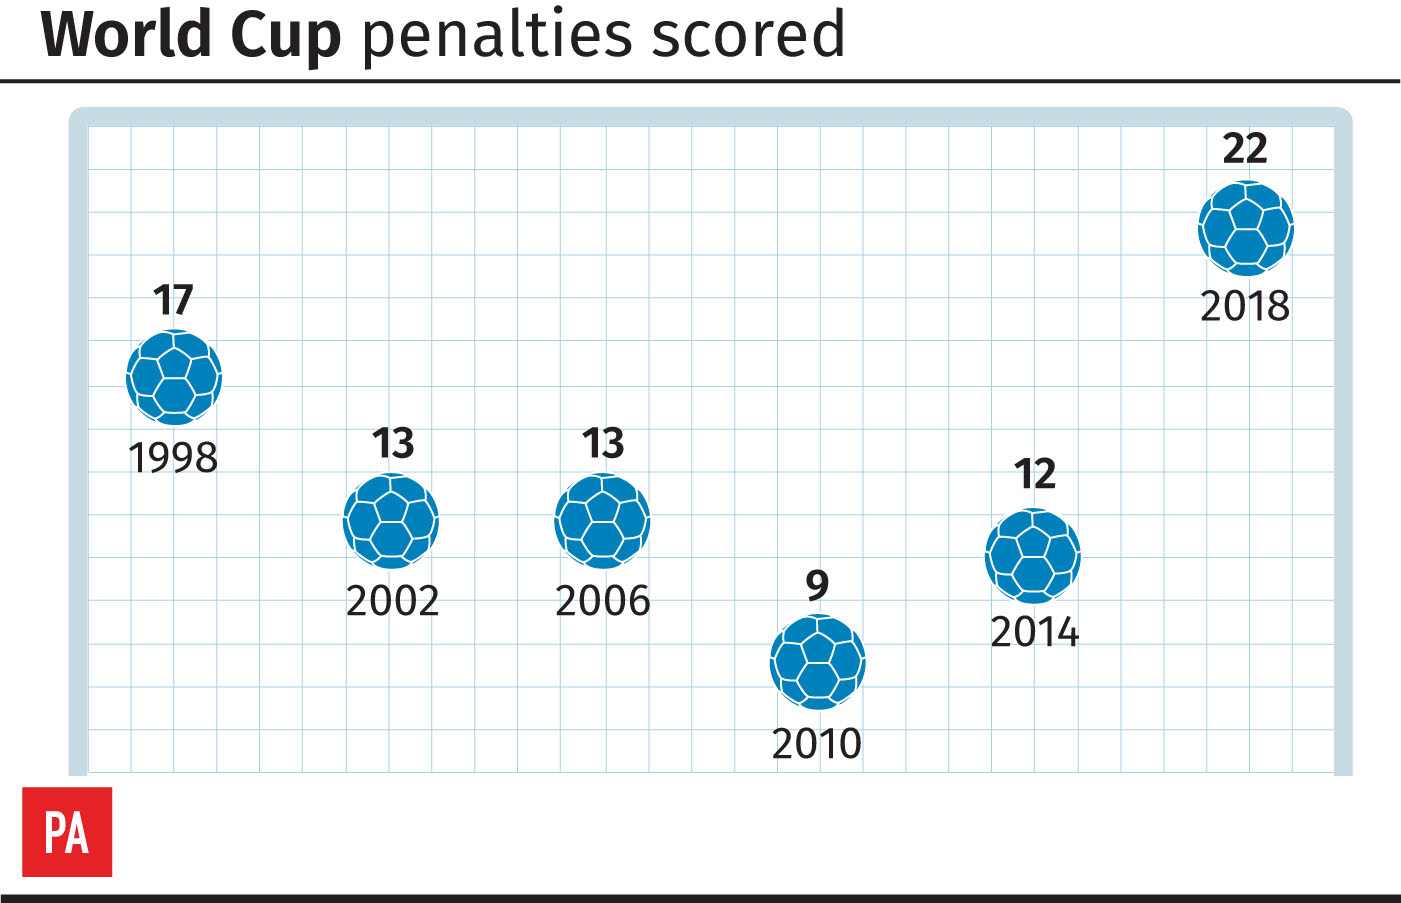 Penalties scored at each World Cup since 1998